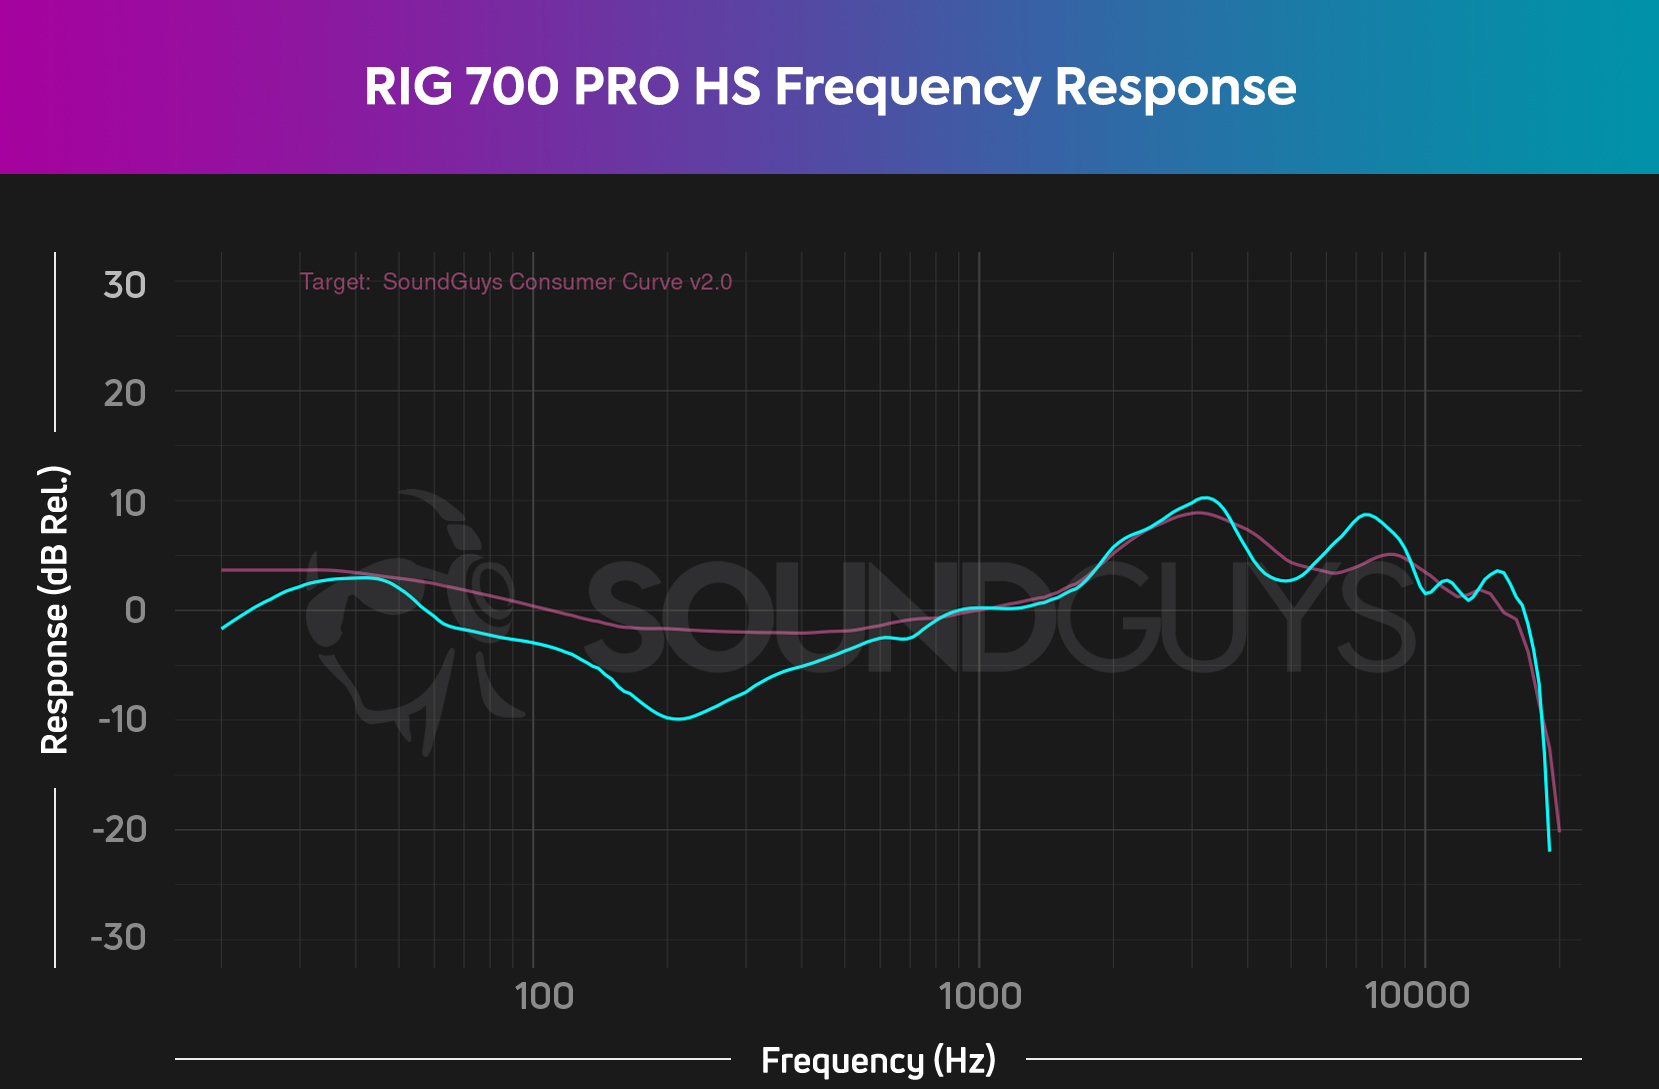 The frequency response chart for the RIG 700 PRO HS.